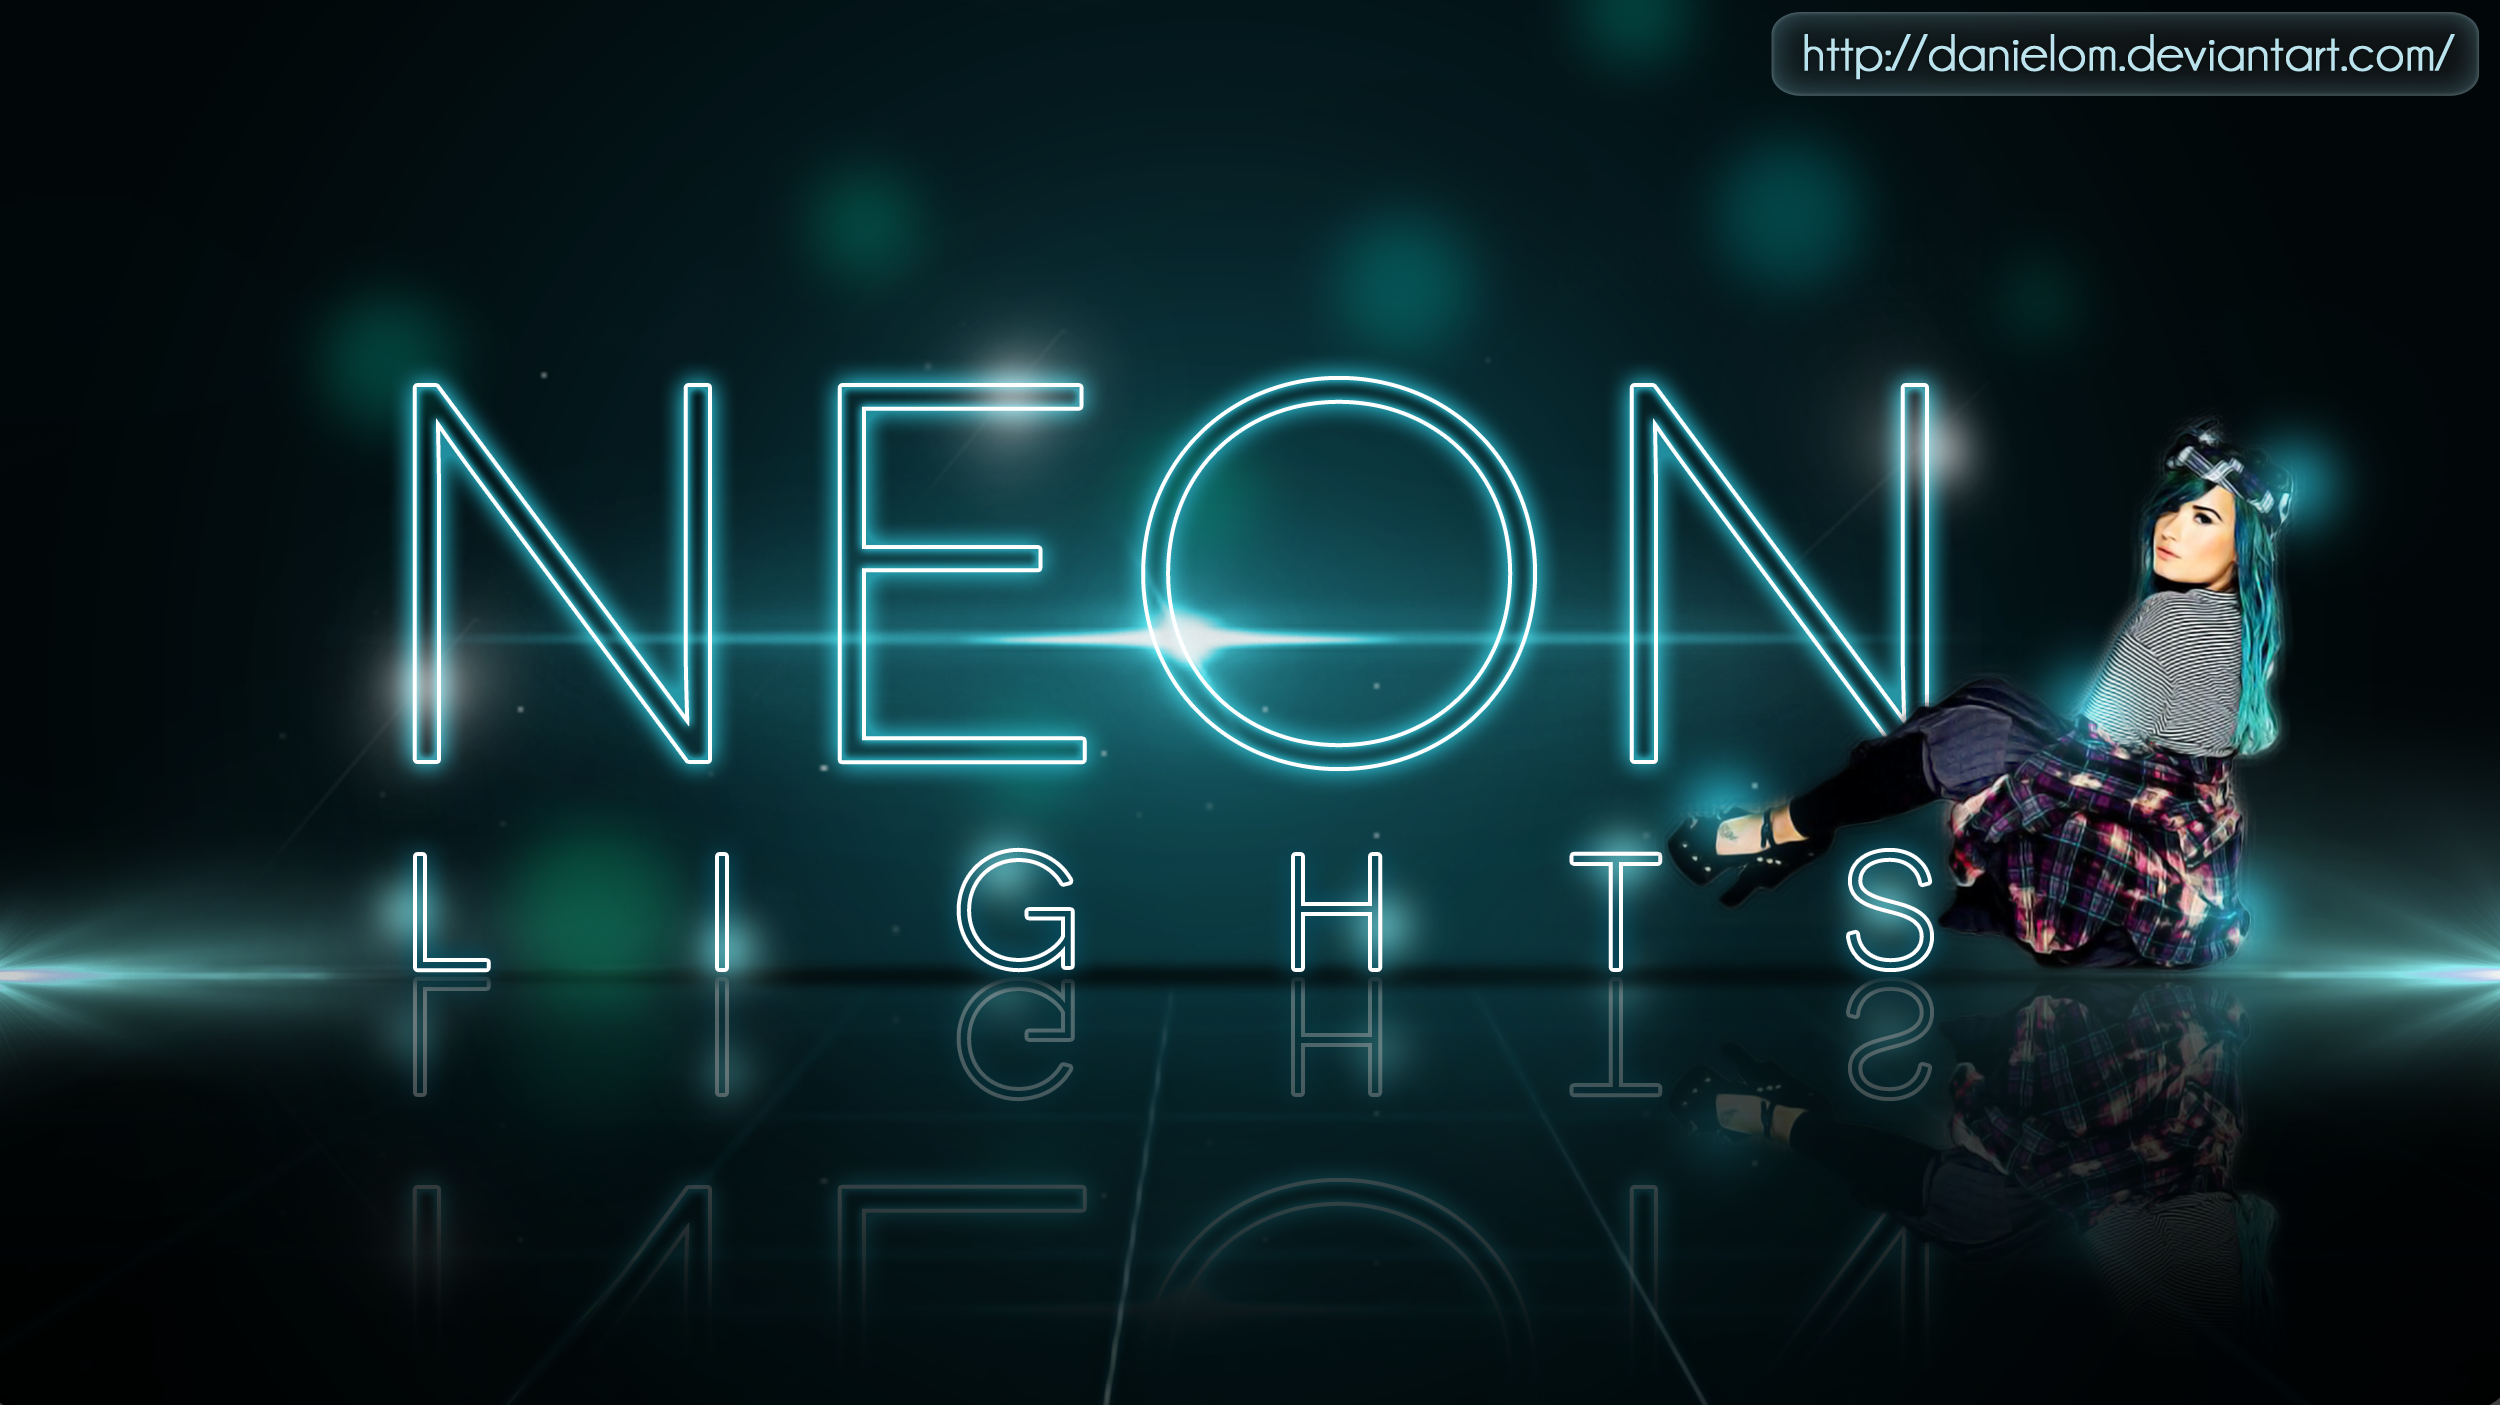 Wallpaper Neon Lights Ps By Danielom On